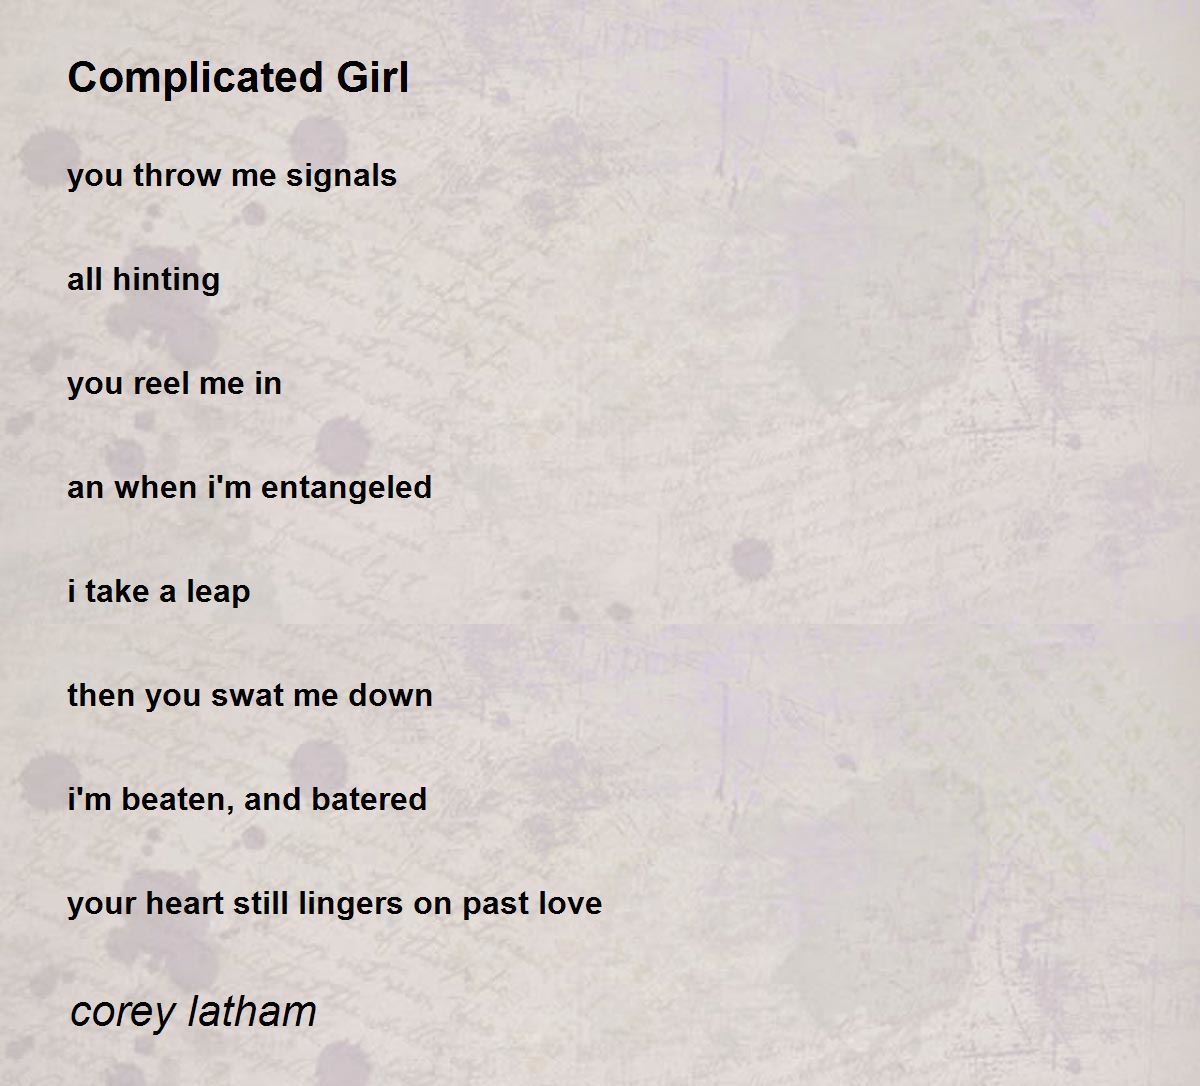 Why are girls complicated